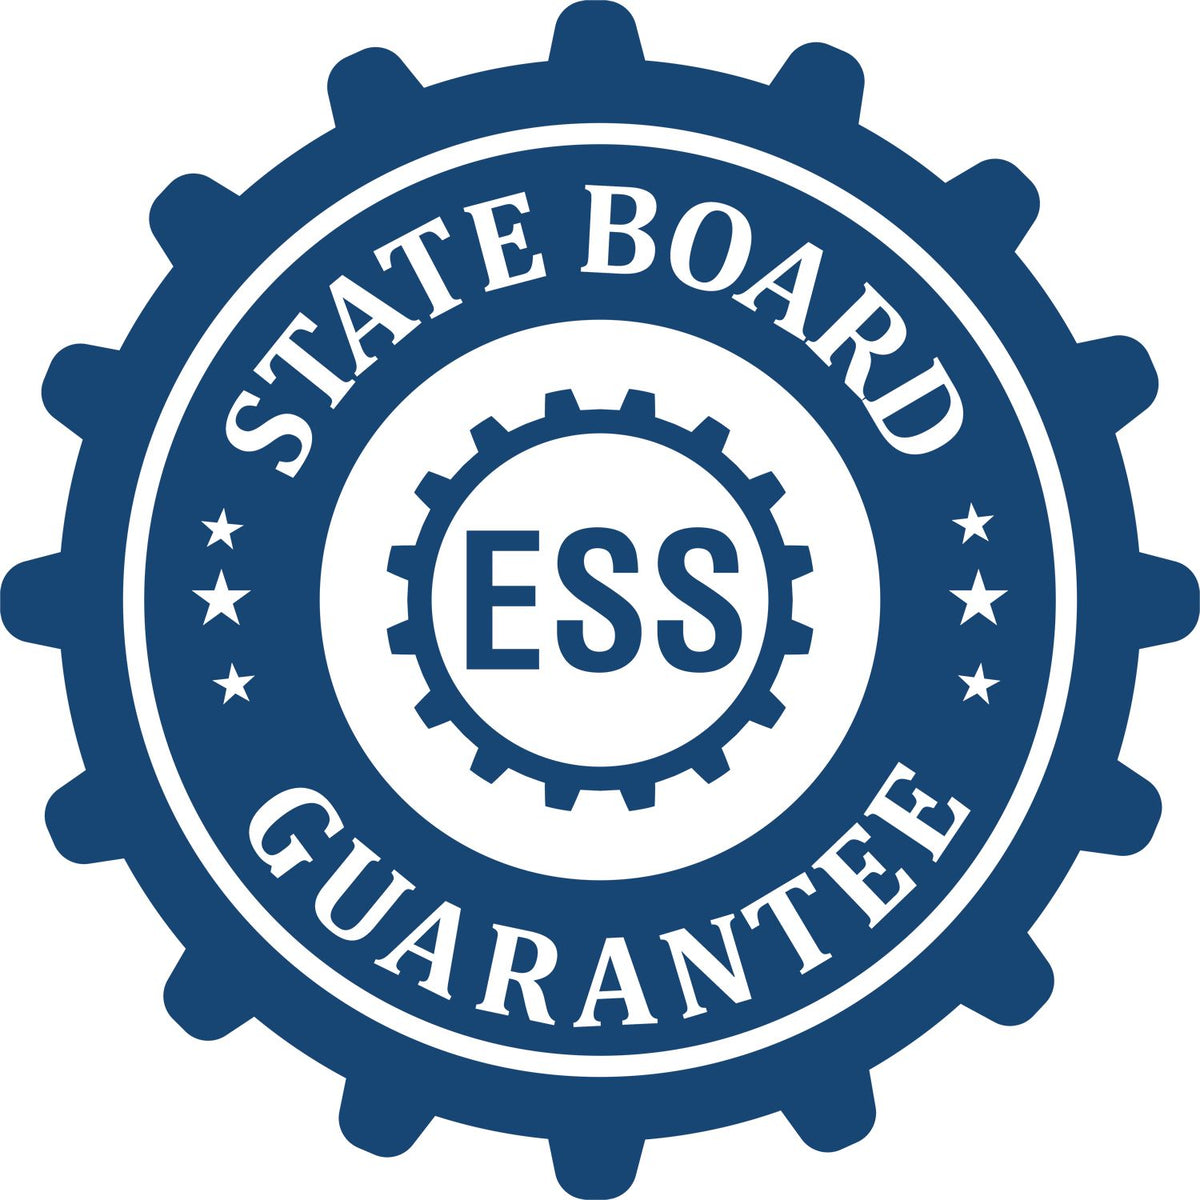 An emblem in a gear shape illustrating a state board guarantee for the Soft Alaska Professional Engineer Seal product.